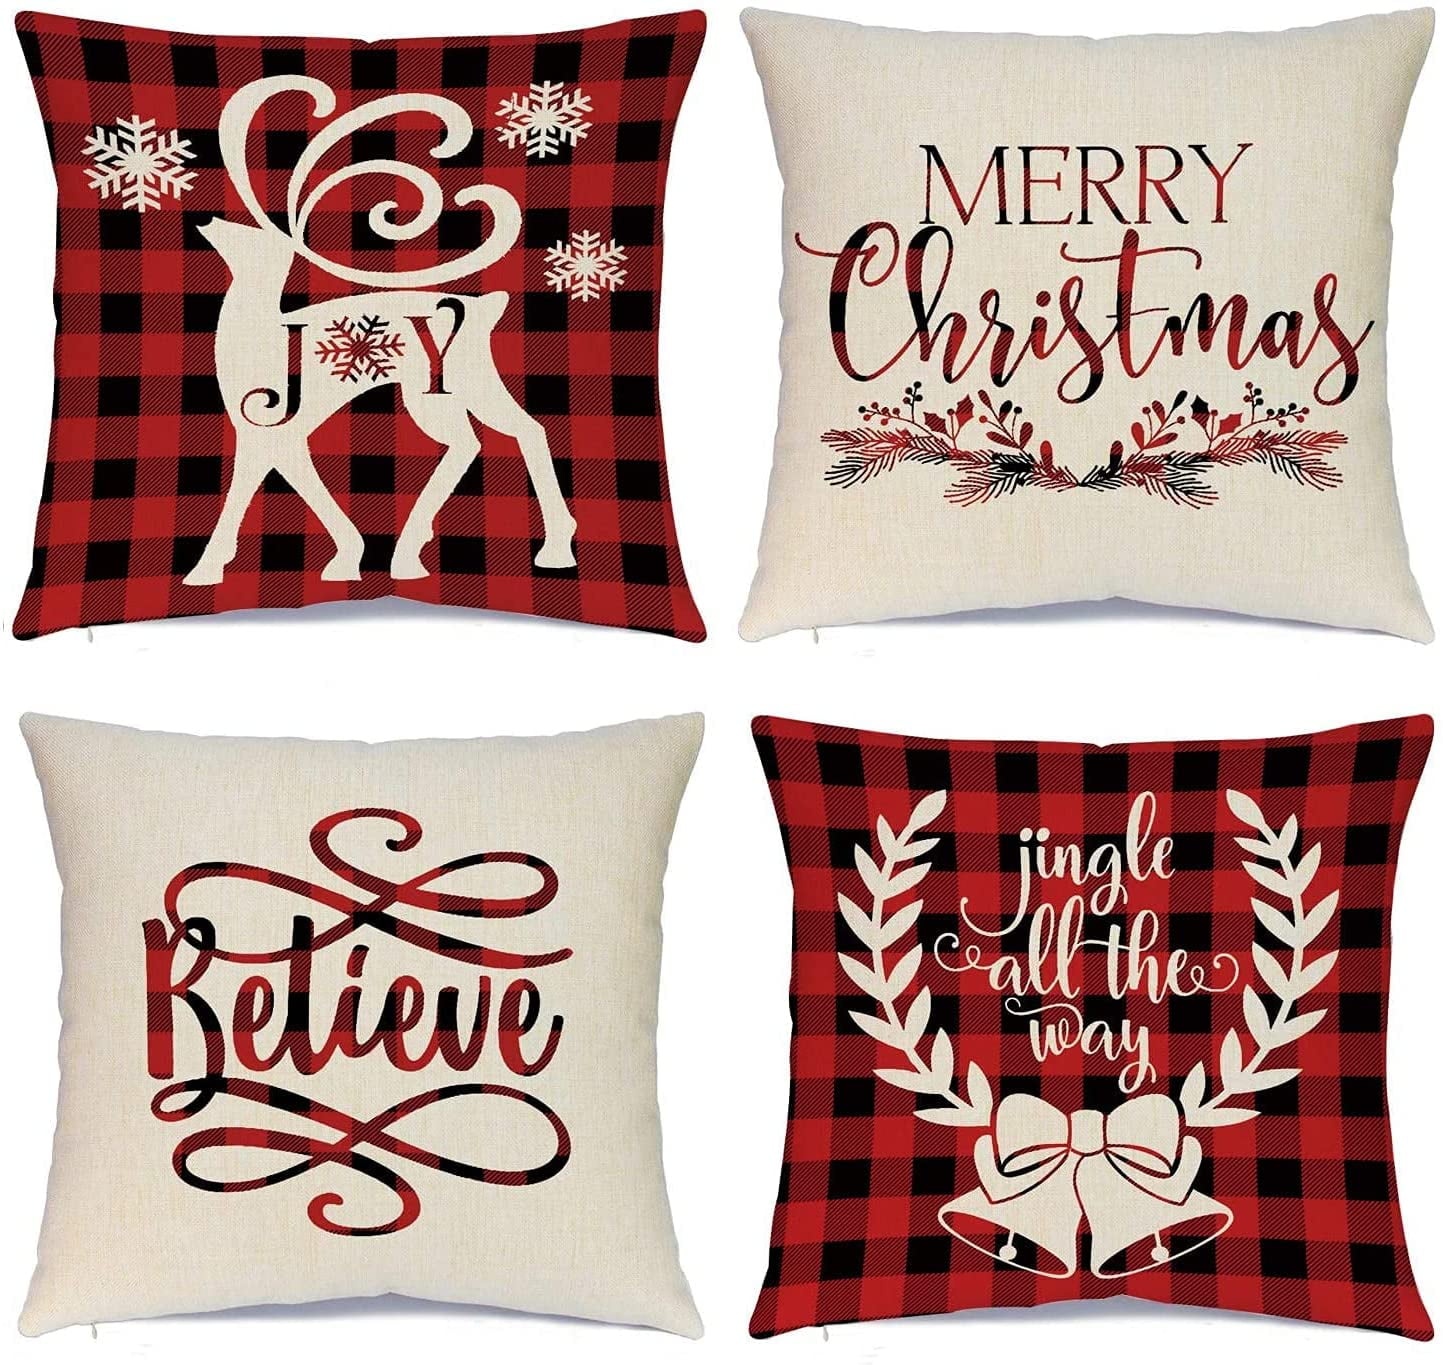 Christmas Xmas Snowman Series Cushion Cover Case Pillow Custom Zippered Square Pillowcase Hlonon Christmas Pillow Covers 18 x 18 Inches Set of 4